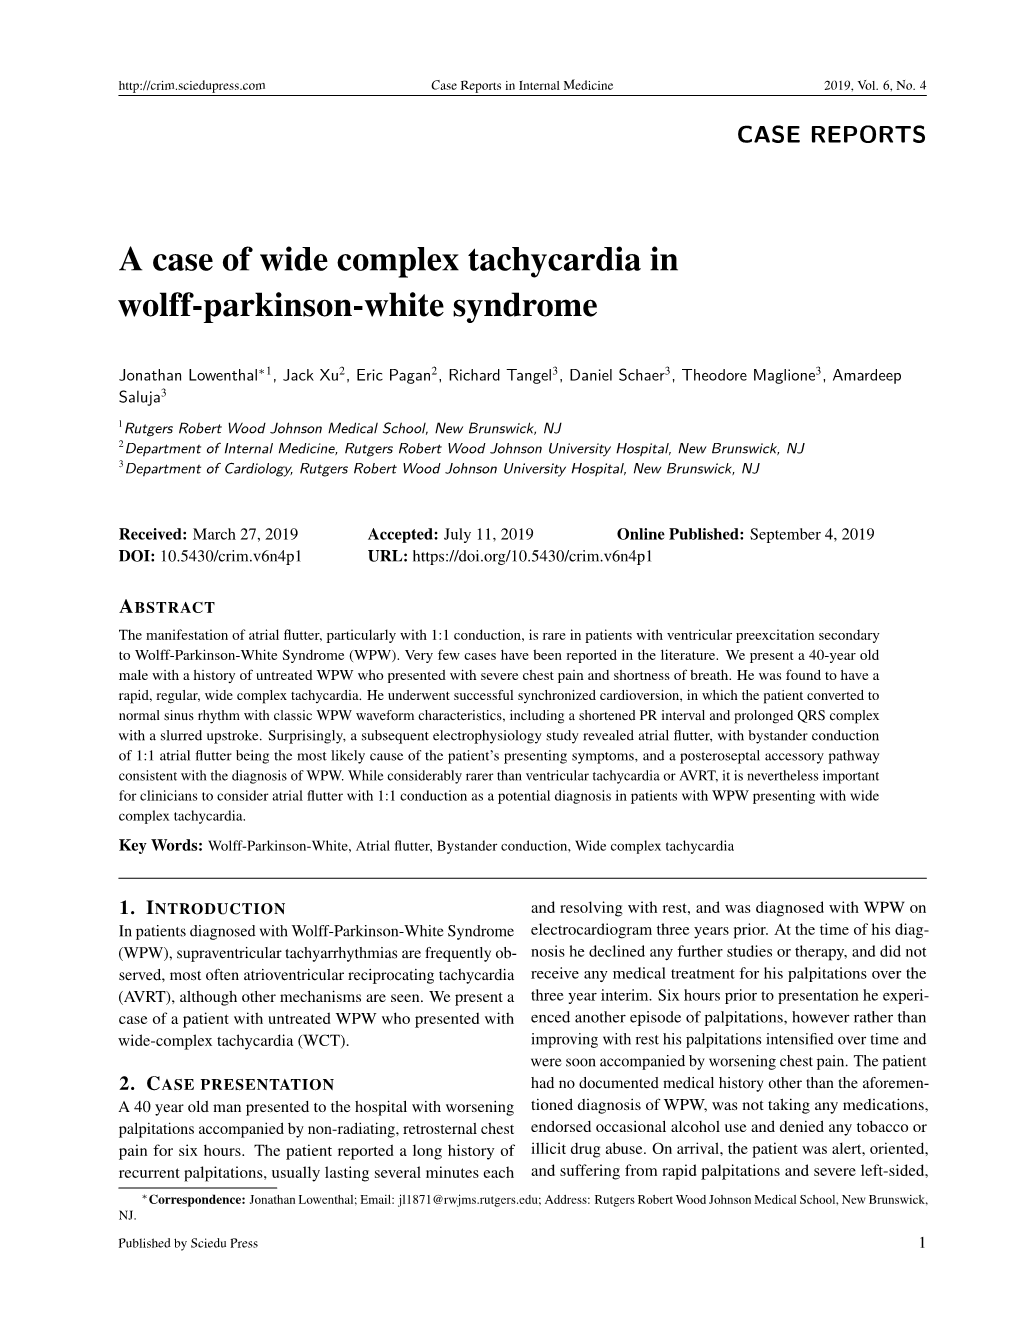 A Case of Wide Complex Tachycardia in Wolff-Parkinson-White Syndrome